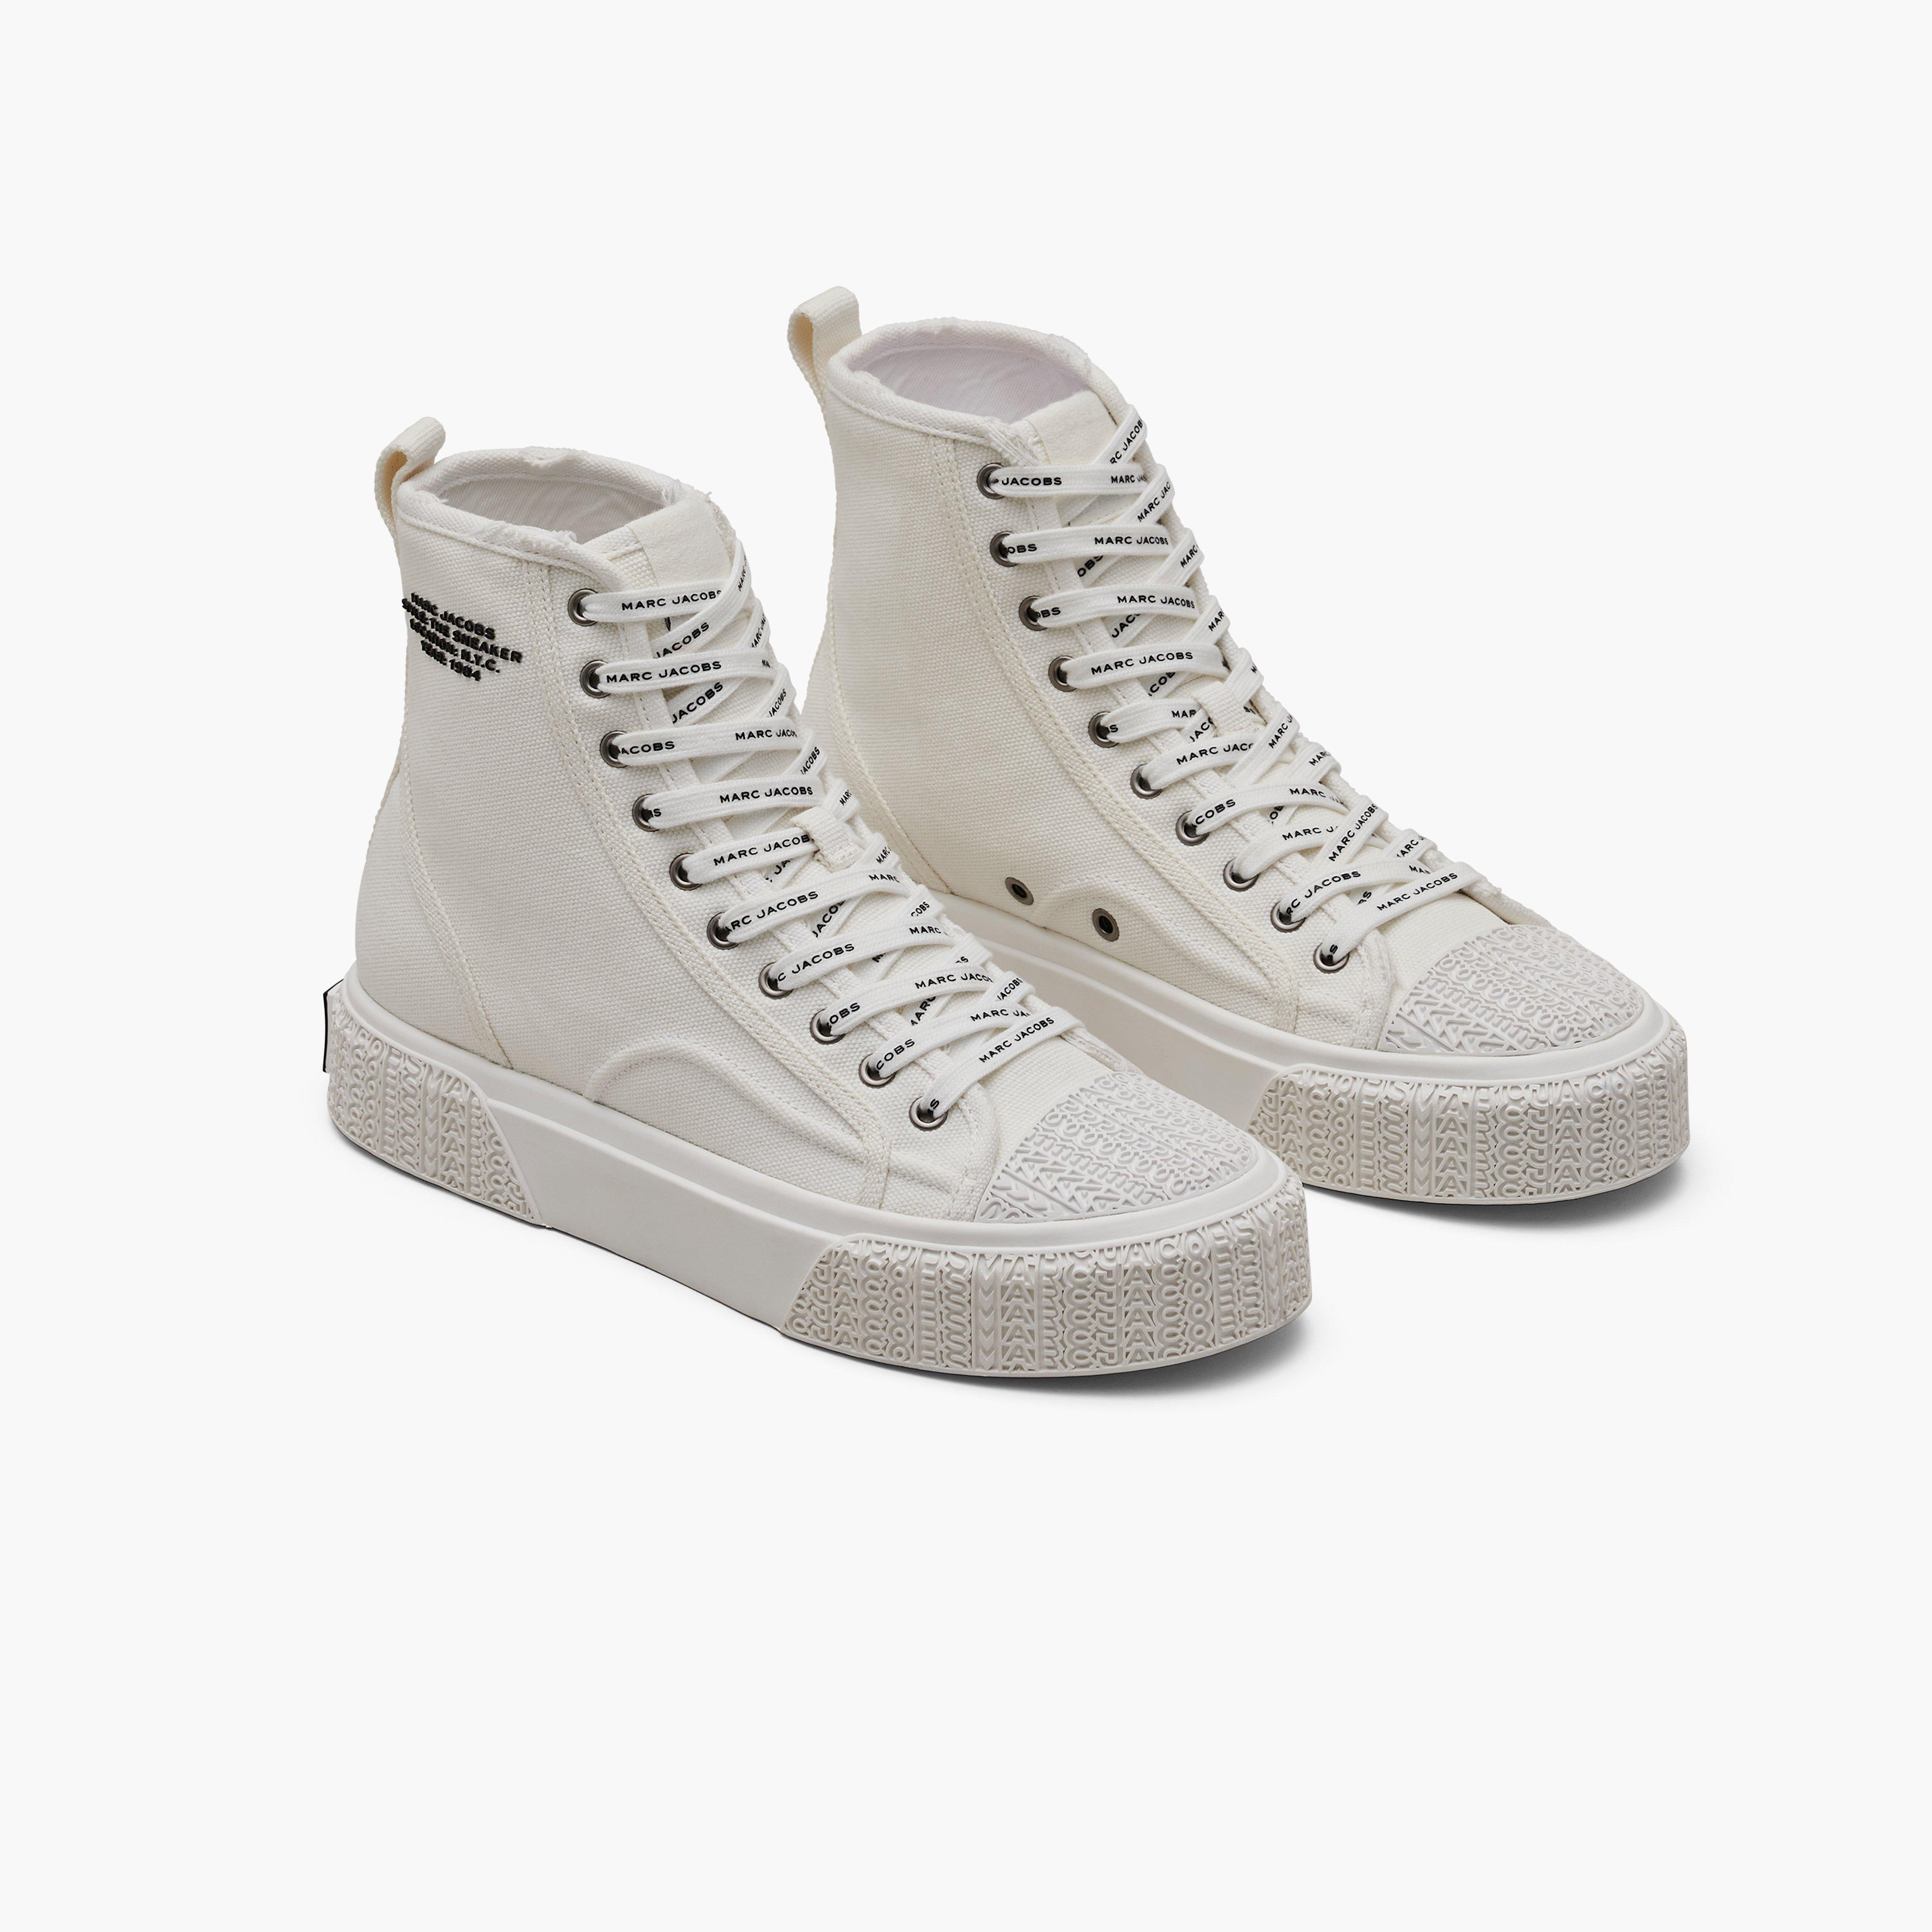 THE HIGH TOP SNEAKER - 1